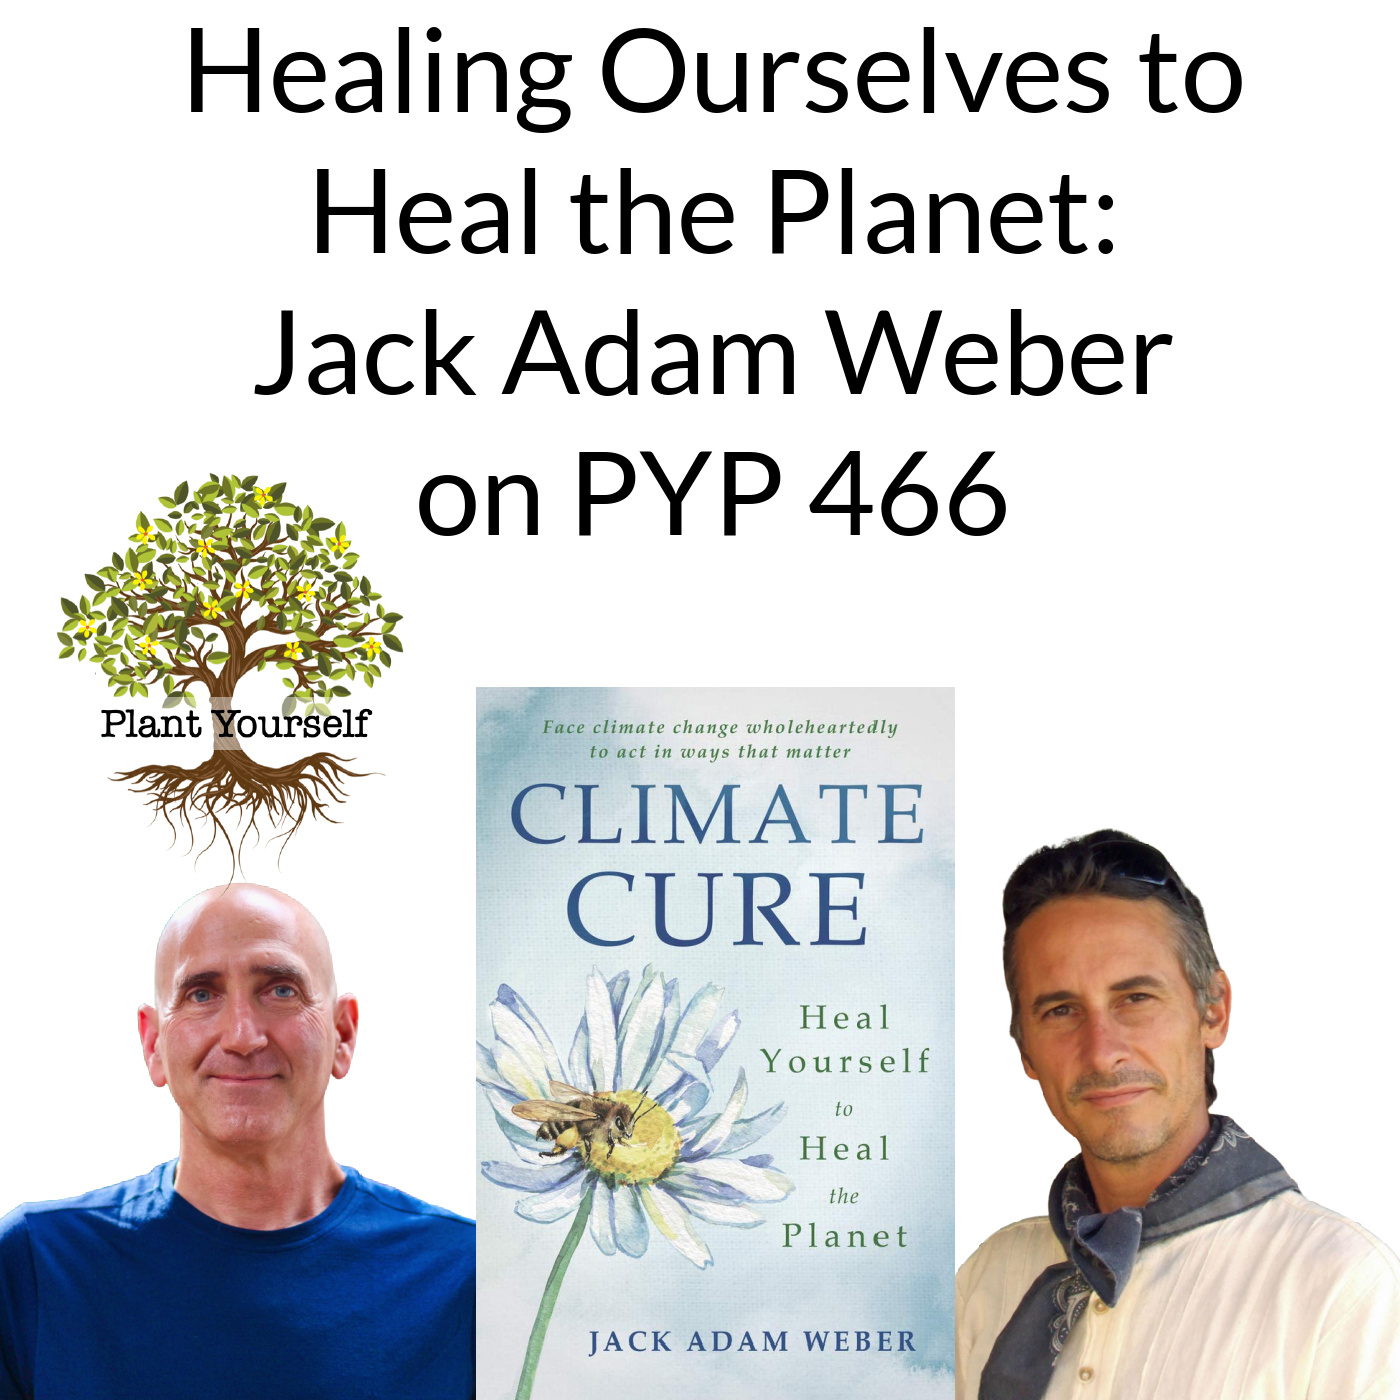 Healing Ourselves to Heal the Climate: Jack Adam Weber on PYP 466